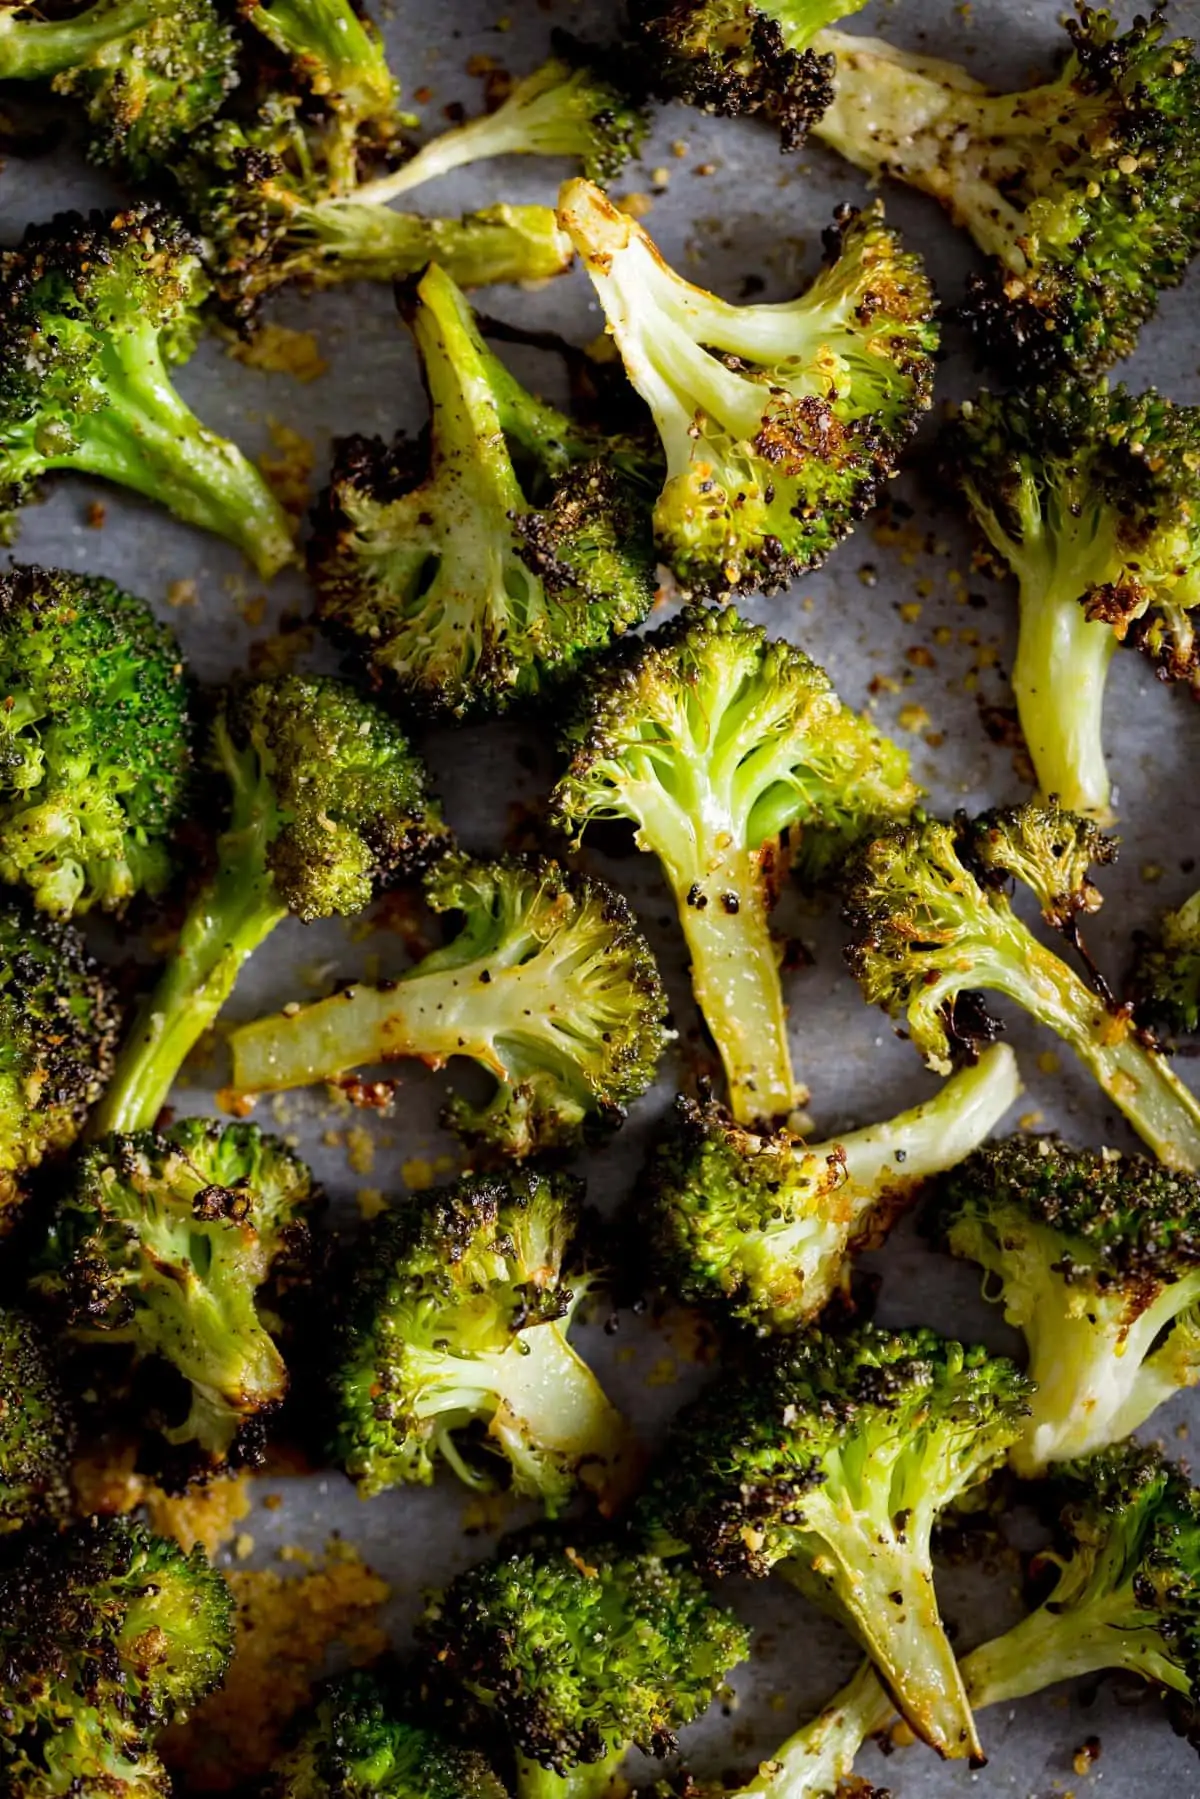 Roasted broccoli with garlic spread out on a white tray